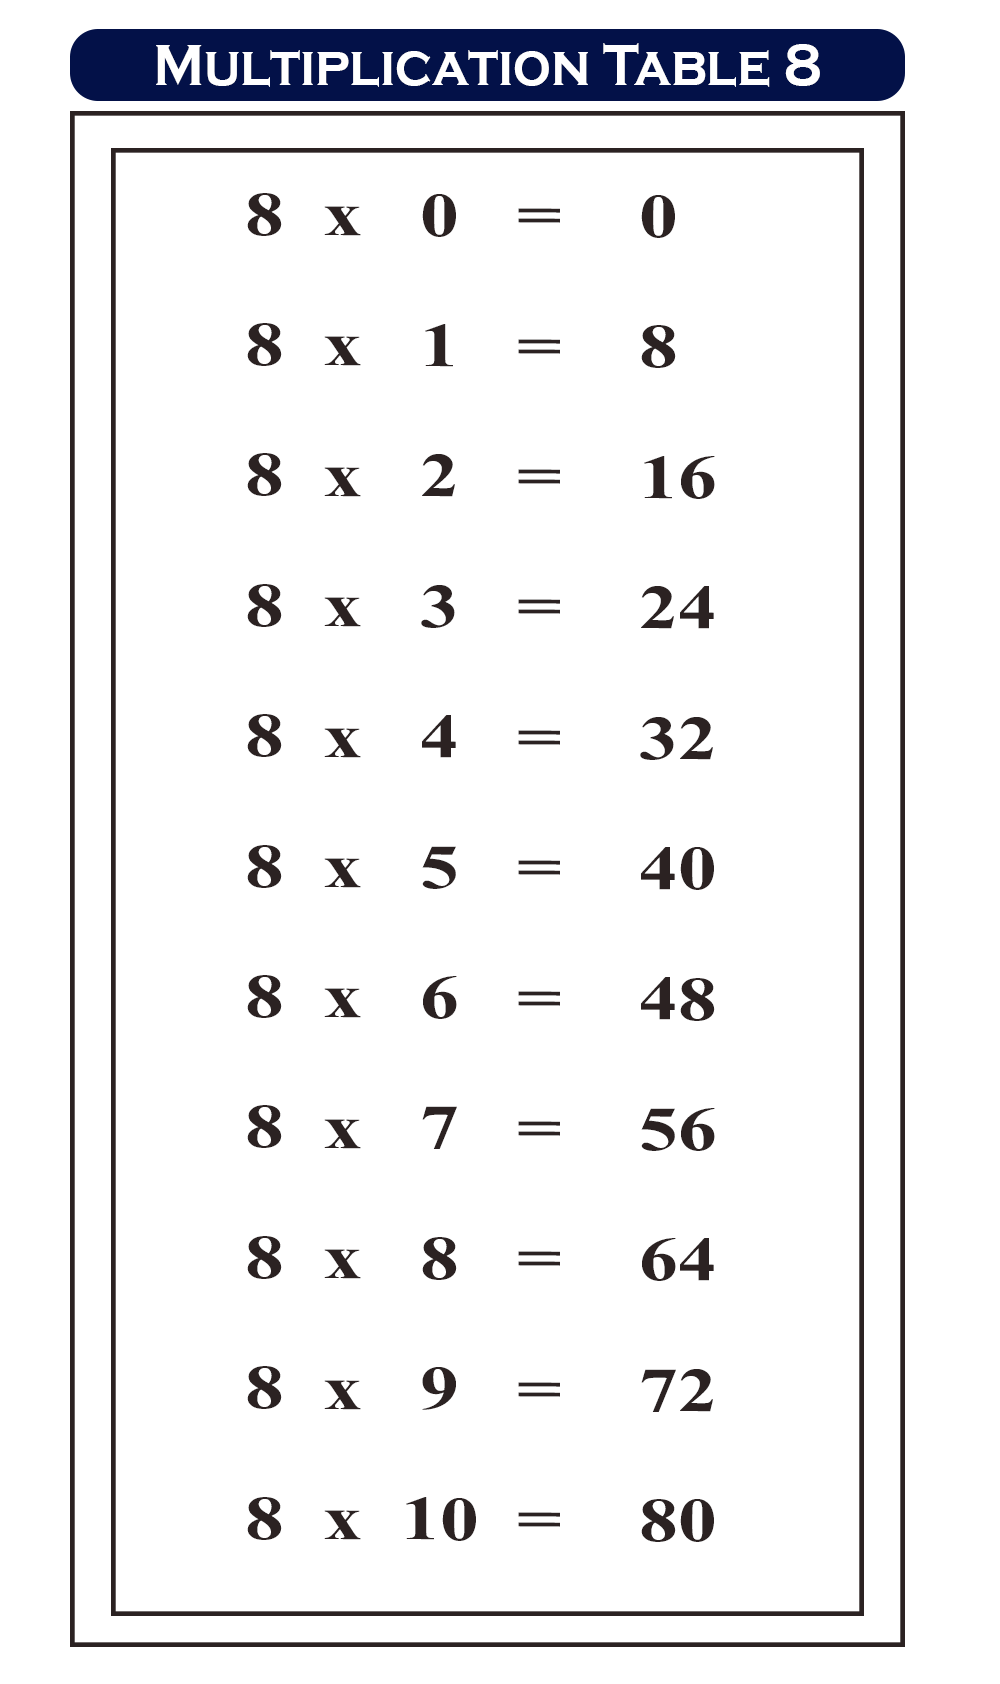 times-table-8-multiplication-table